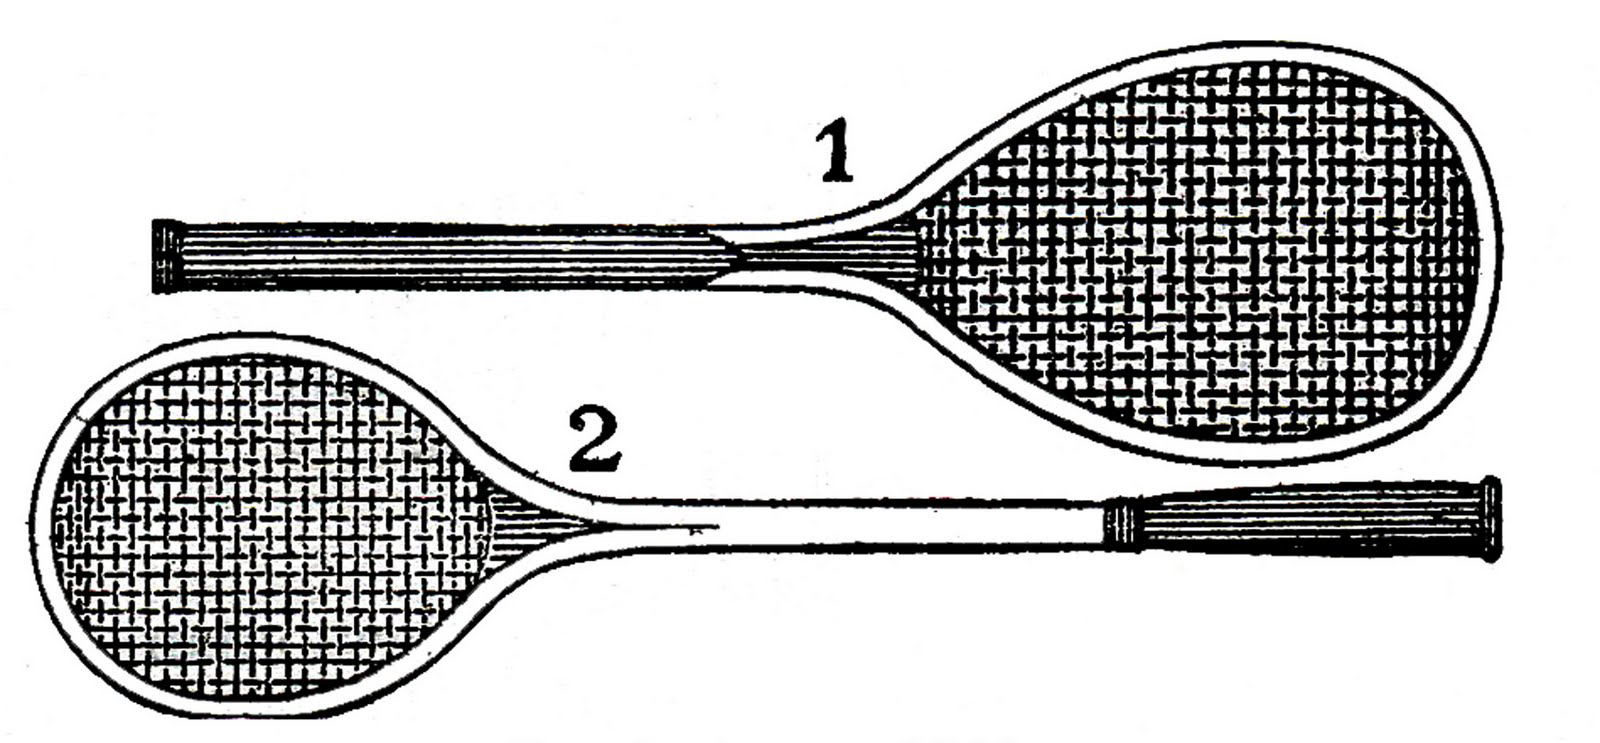 tennis racket clipart black and white